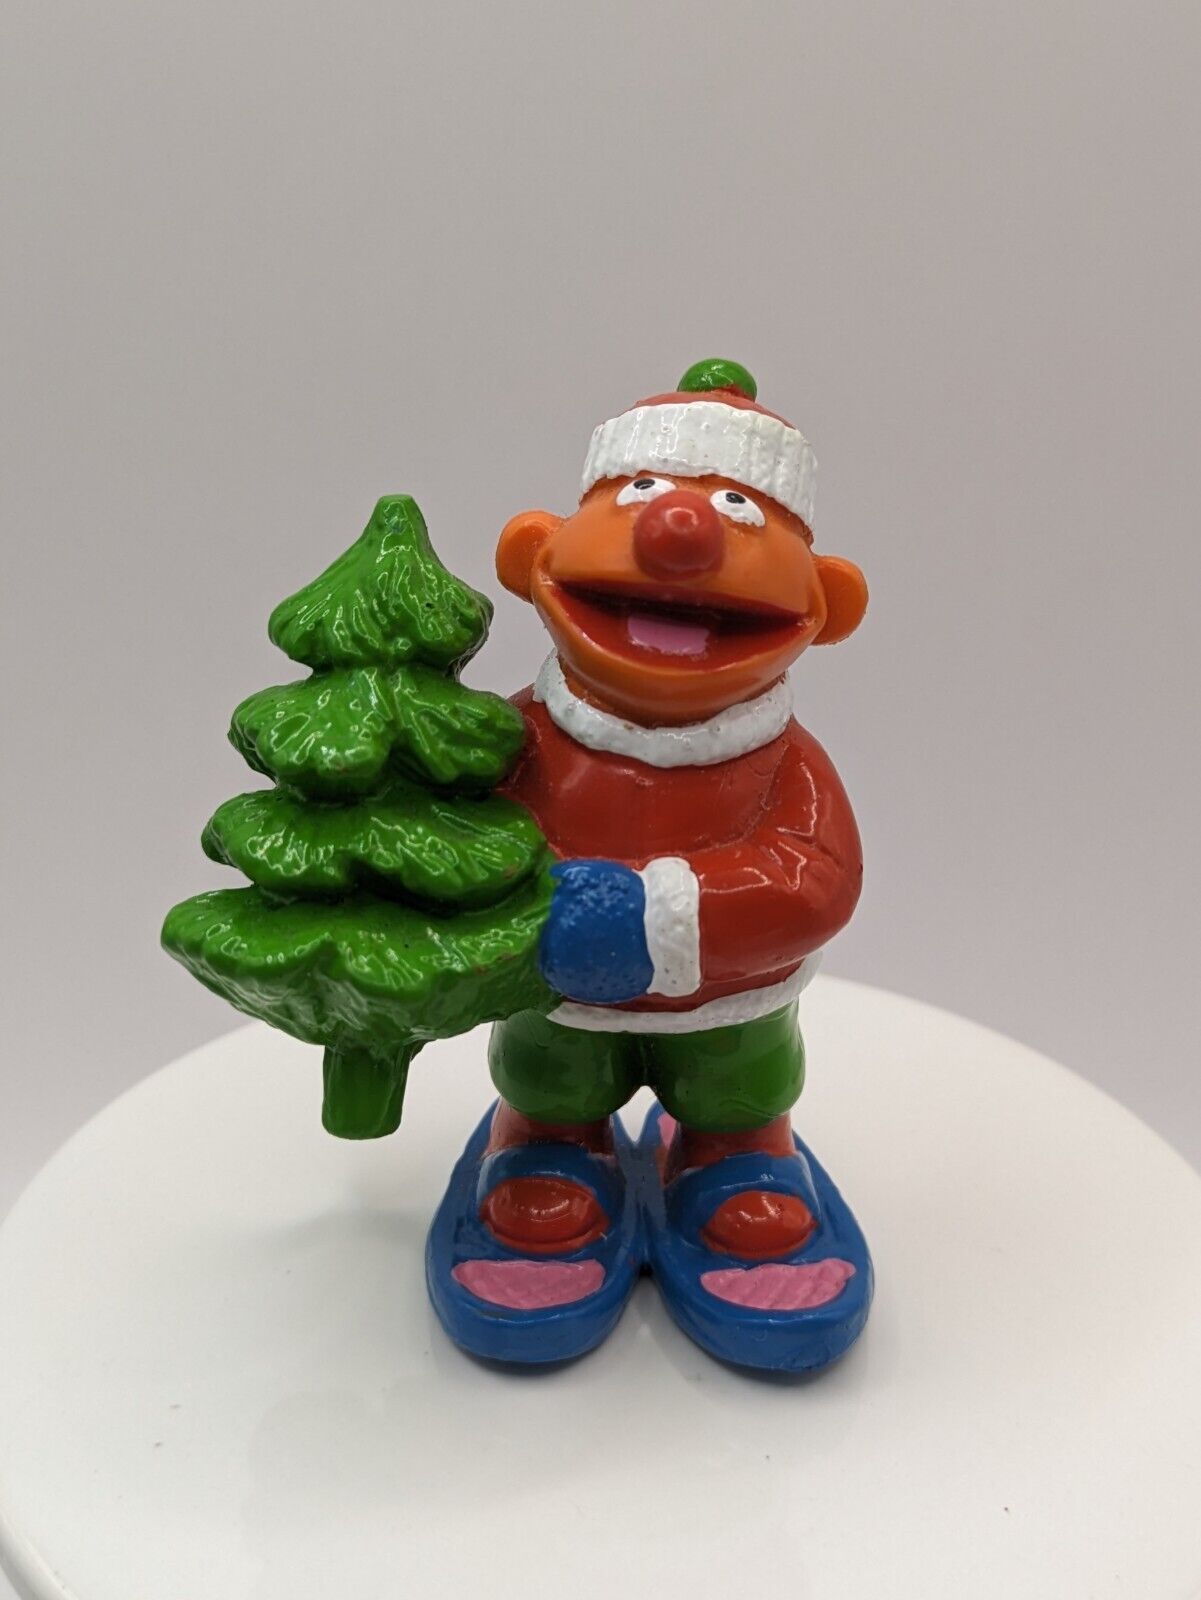 Muppets Sesame Street Ernie Figurine Holding Christmas Tree Cake Topper 3 Inches